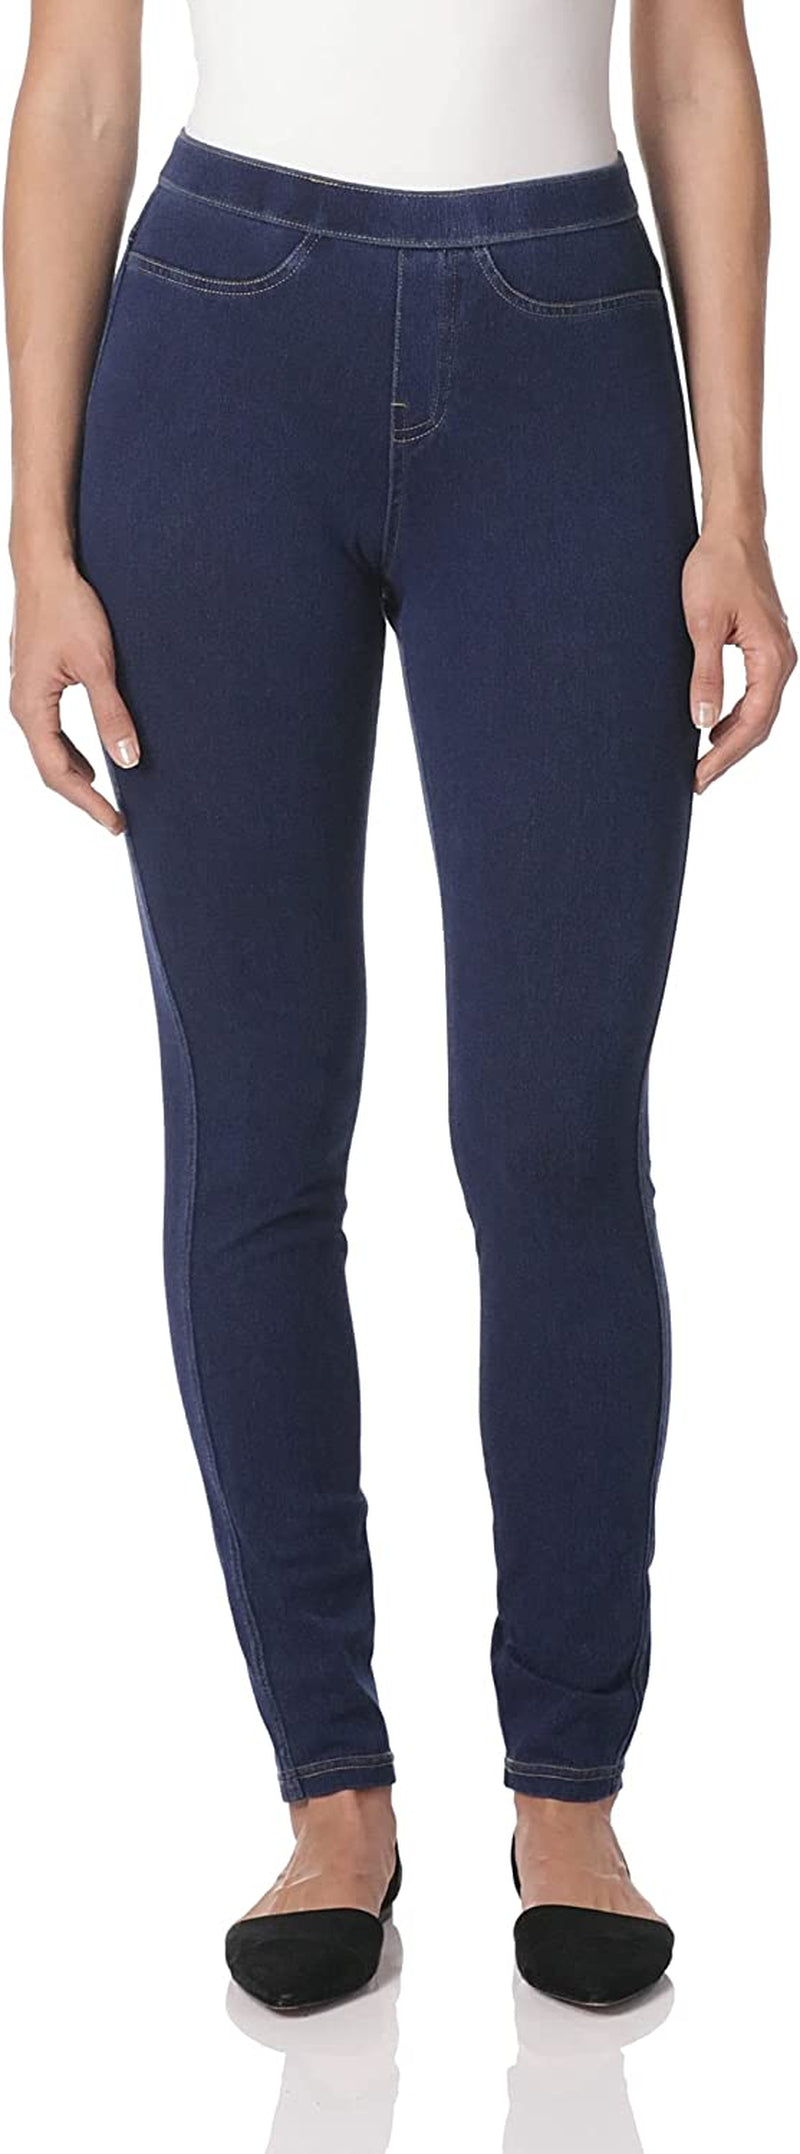 Women'S Classic Jeggings with Back Pockets